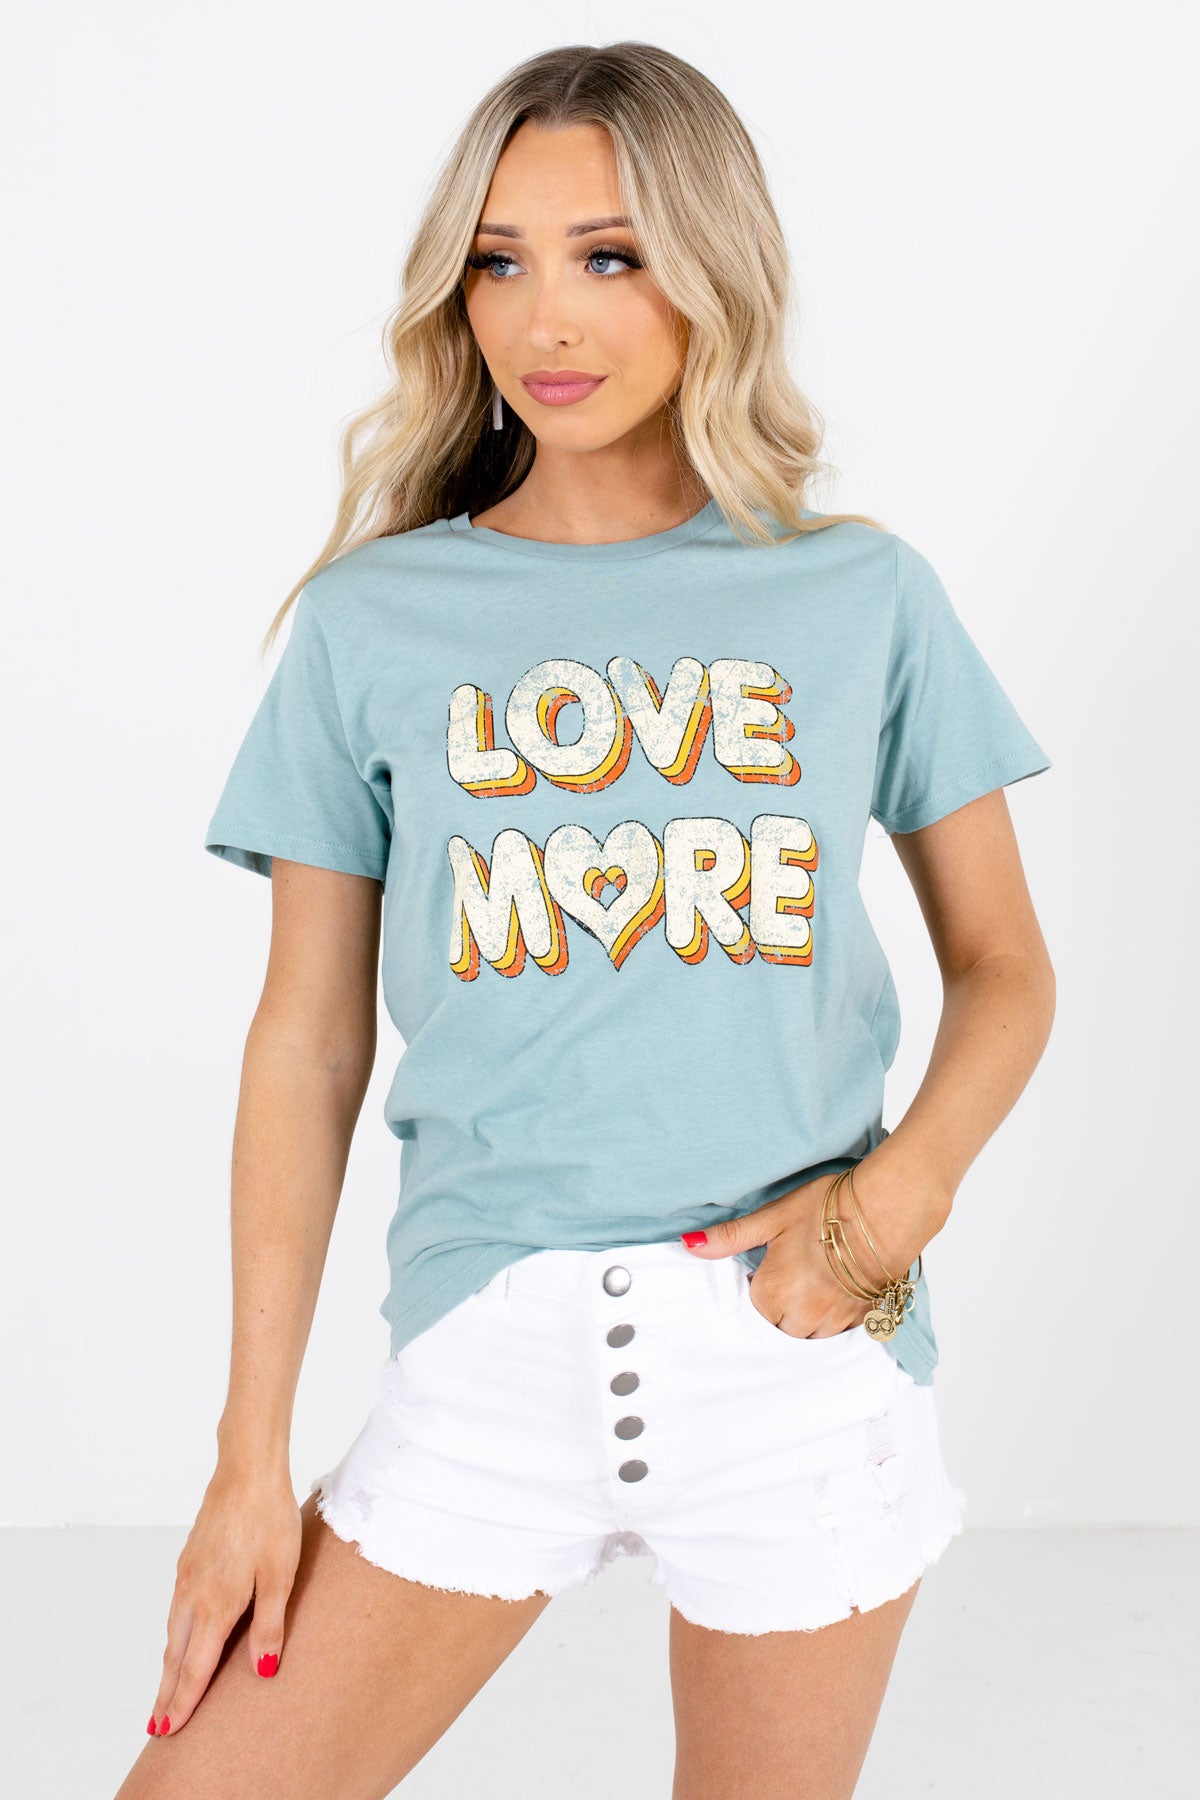 Blue "Love More" Lettering Boutique Graphic Tees for Women